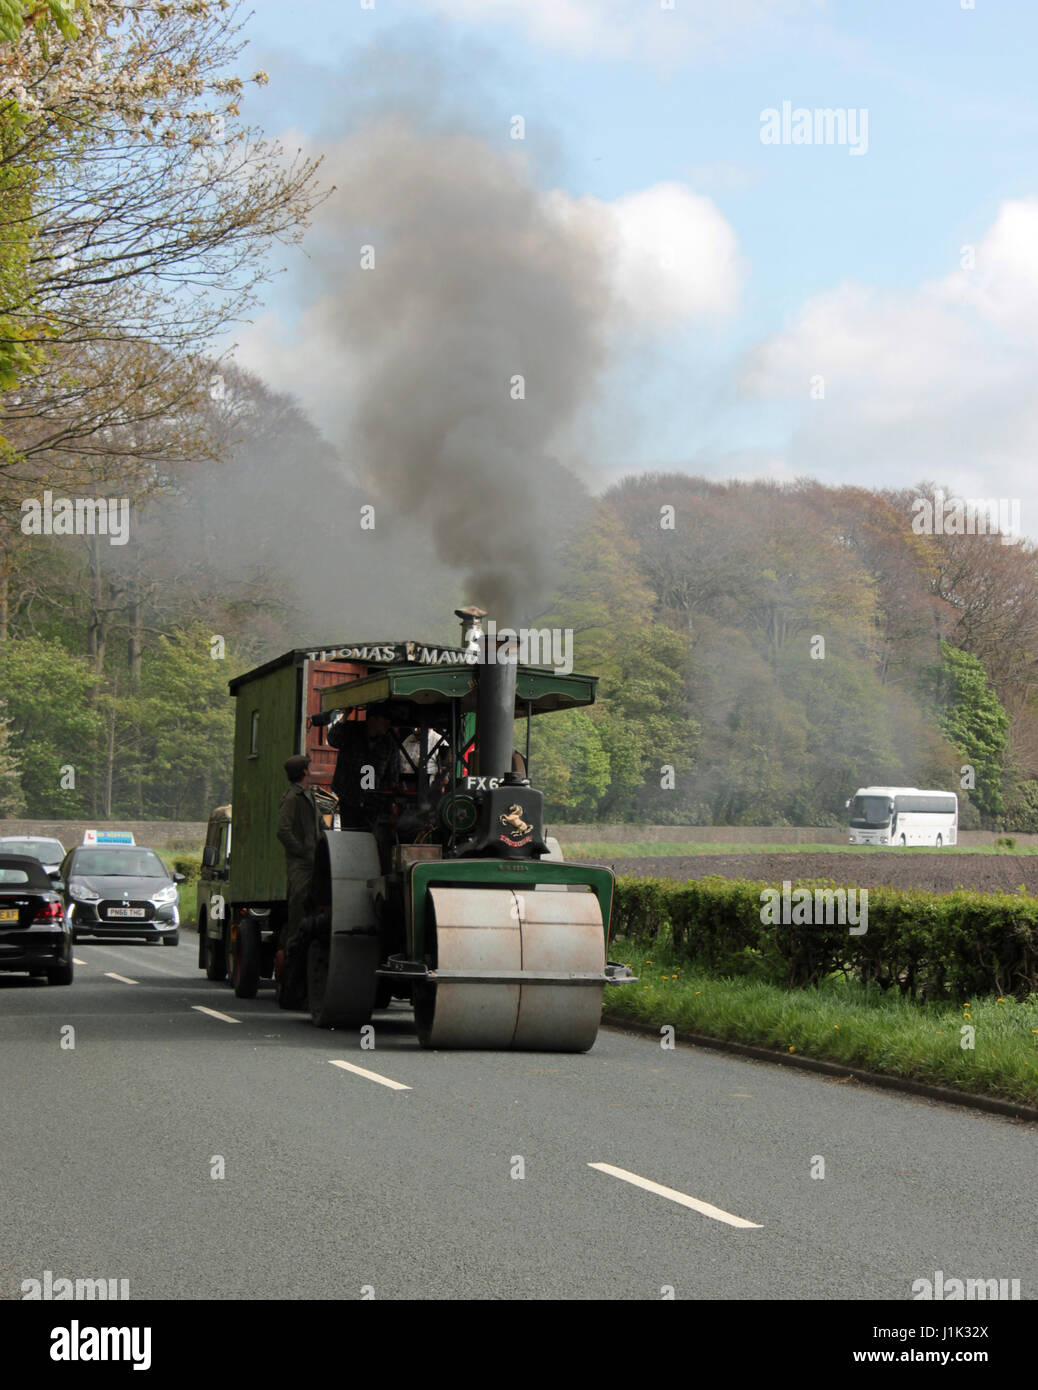 Lancashire, UK. 21st April, 2017. Steam roller on the way to the rally Lancashire UK Credit: Colin Wareing/Alamy Live News Stock Photo